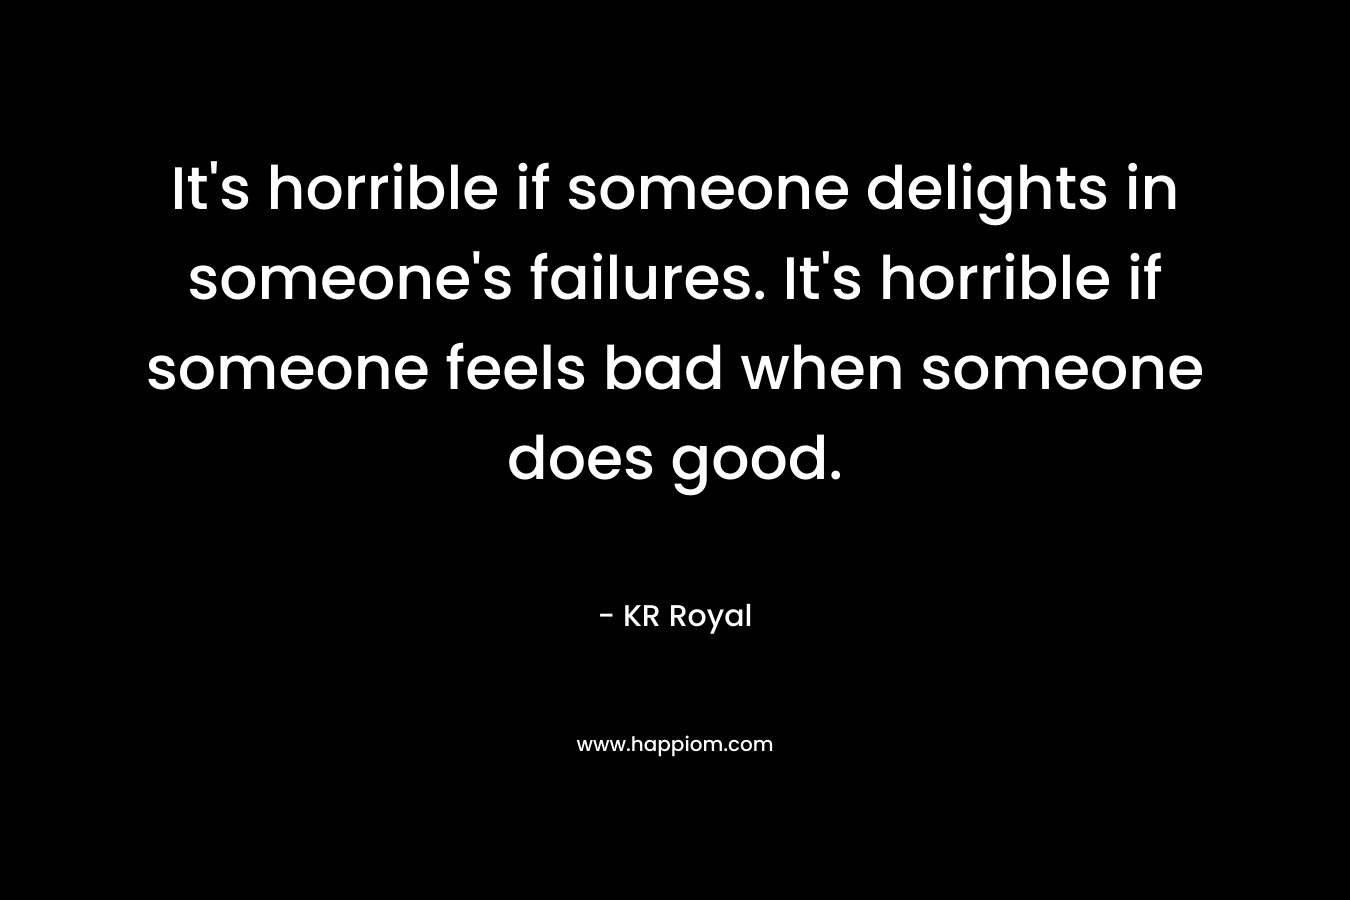 It's horrible if someone delights in someone's failures. It's horrible if someone feels bad when someone does good.